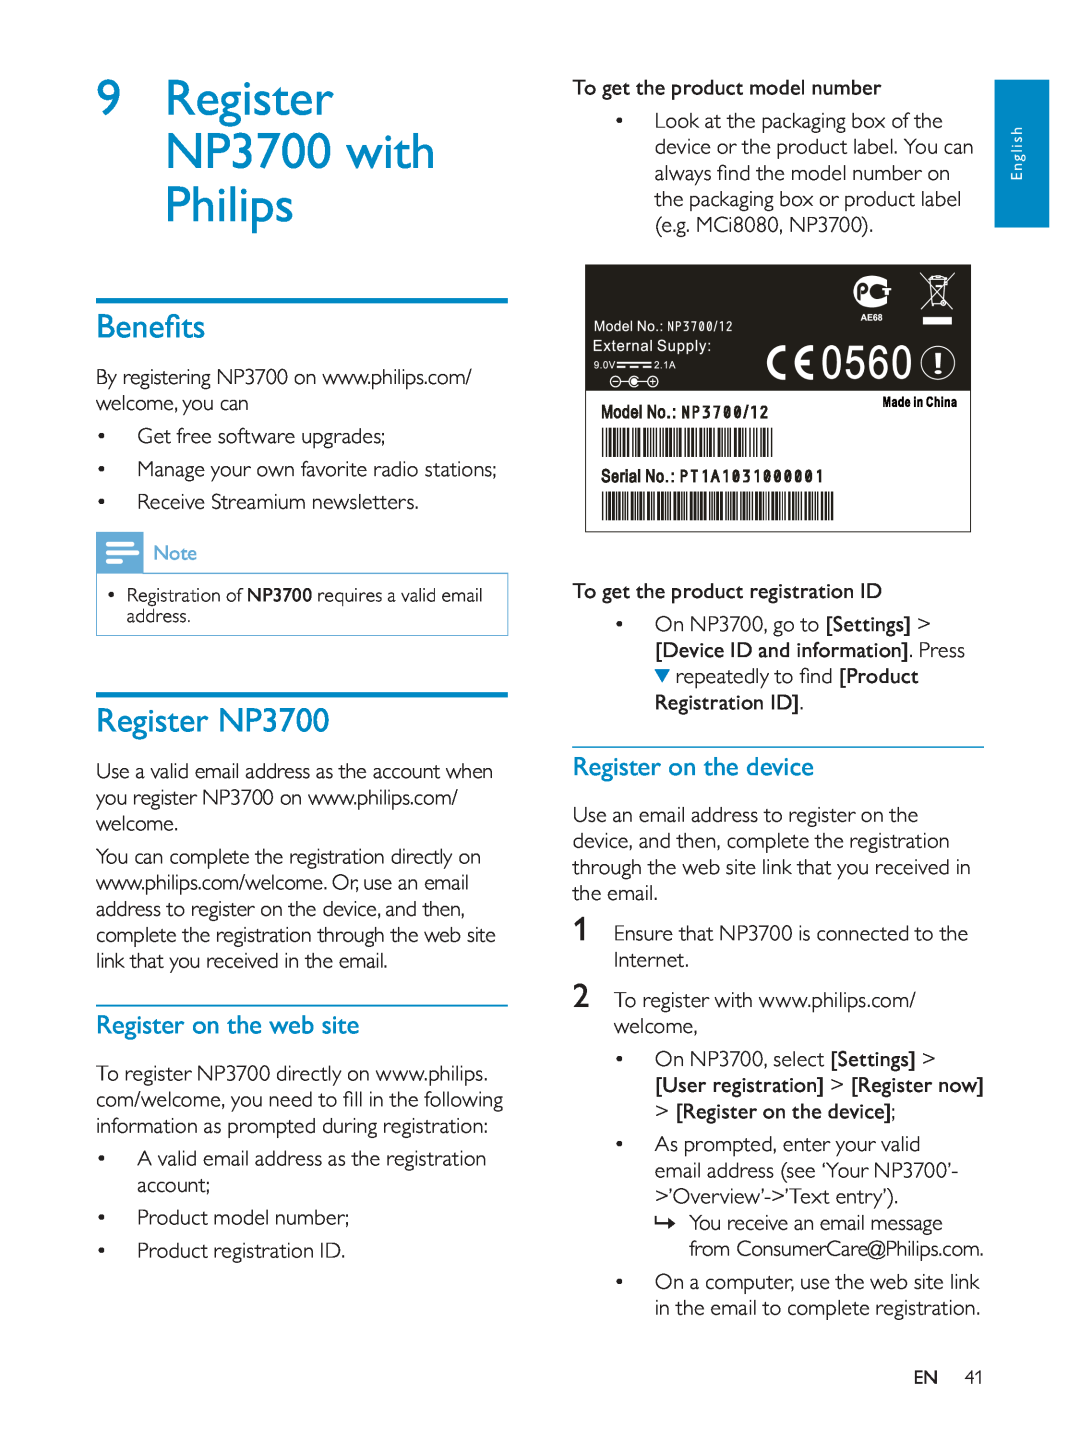 Philips NP3700/12 user manual 9Register NP3700 with Philips, Register on the web site, Register on the device 